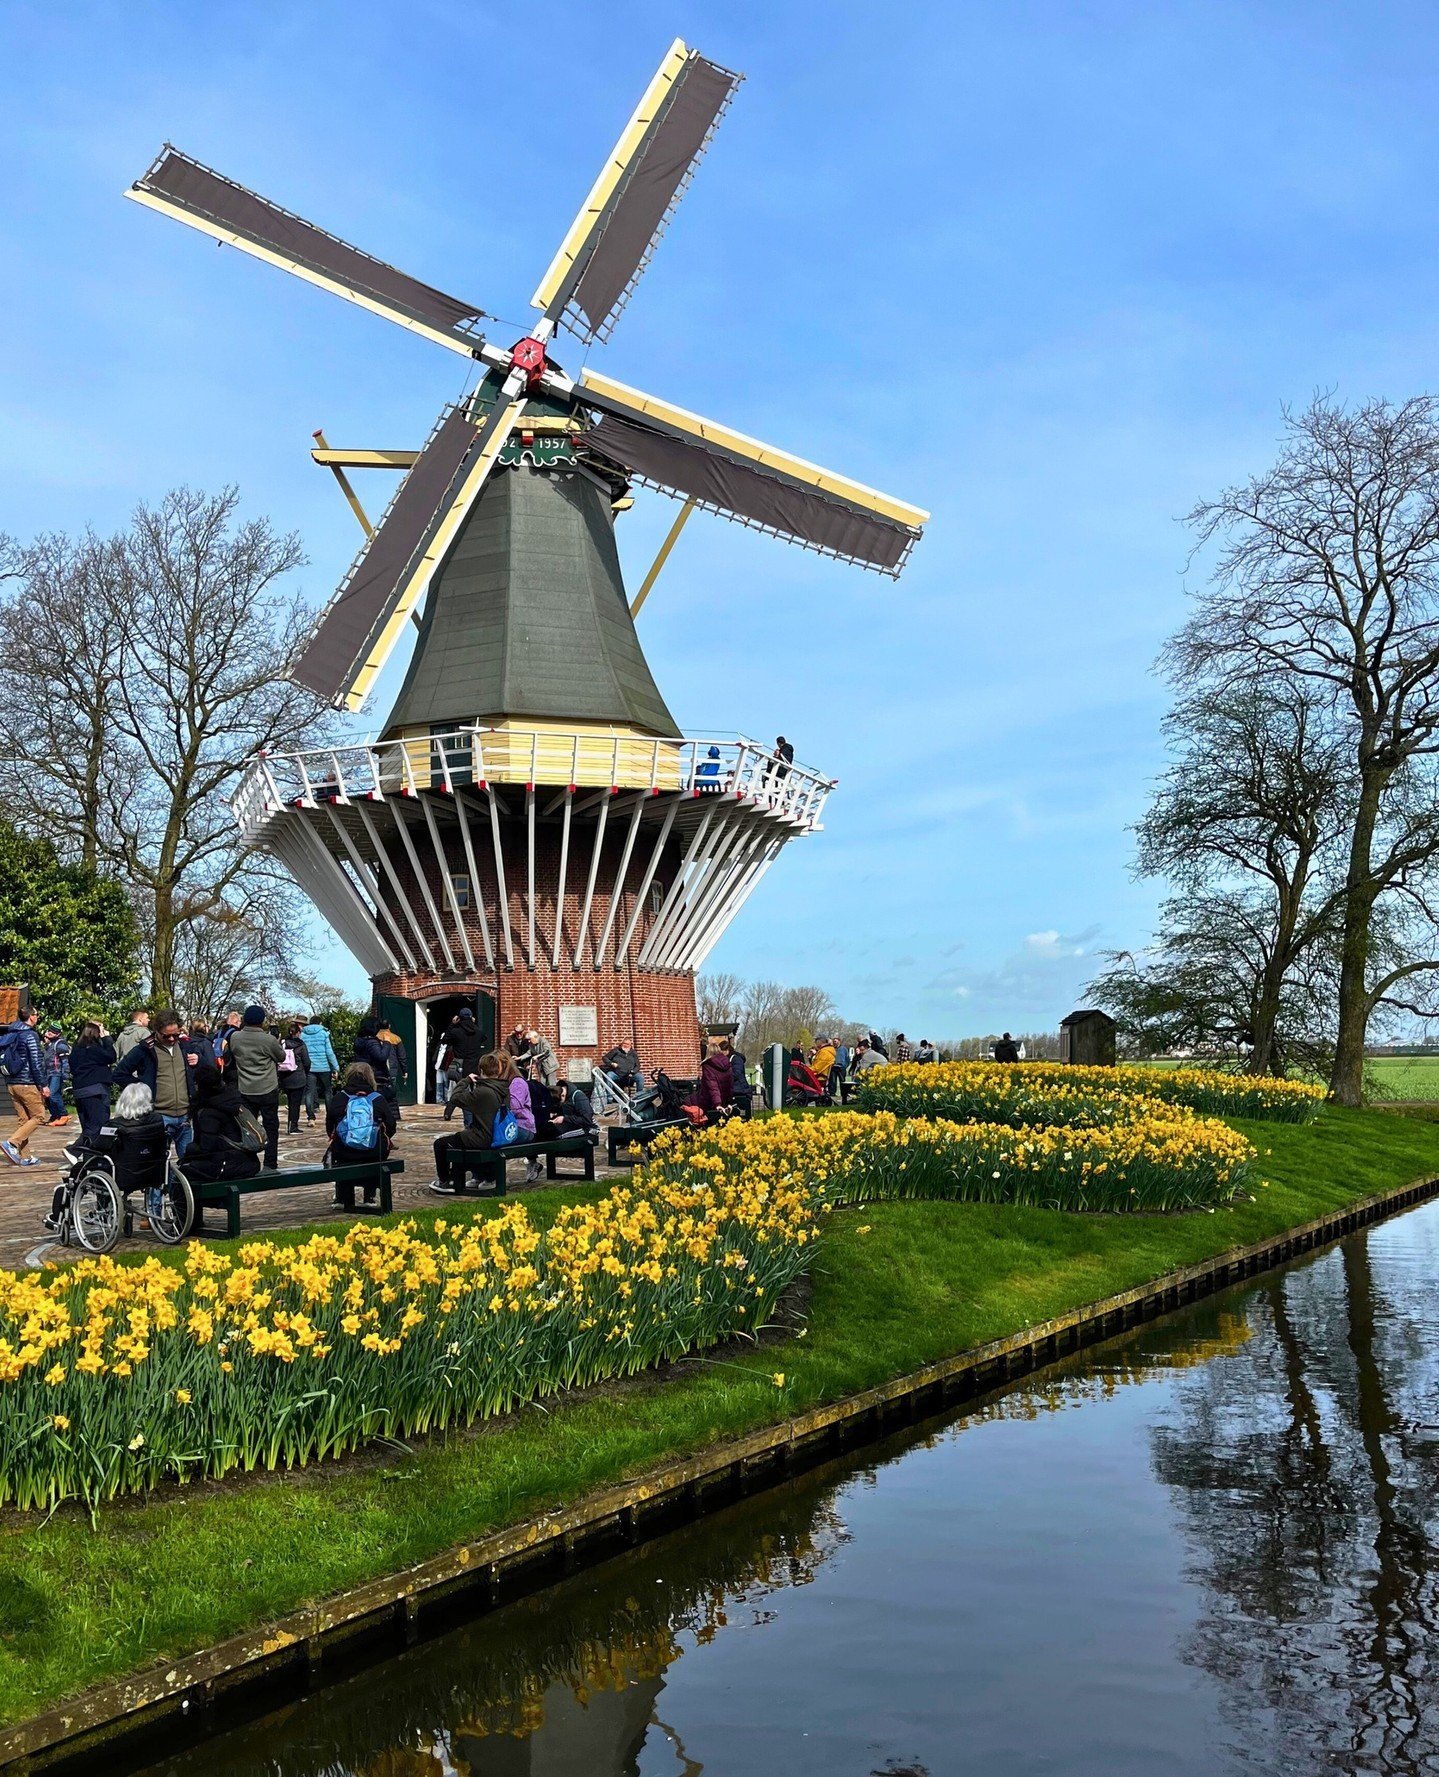 One of our amazing clients shared these photos with us from their recent trip to Europe! ⁠
⁠
They set sail on a river cruise with Viking Cruises on an itinerary called &quot;Tulips and Windmills&quot;, are you serious?? How cute does that sound??🌷⁠
